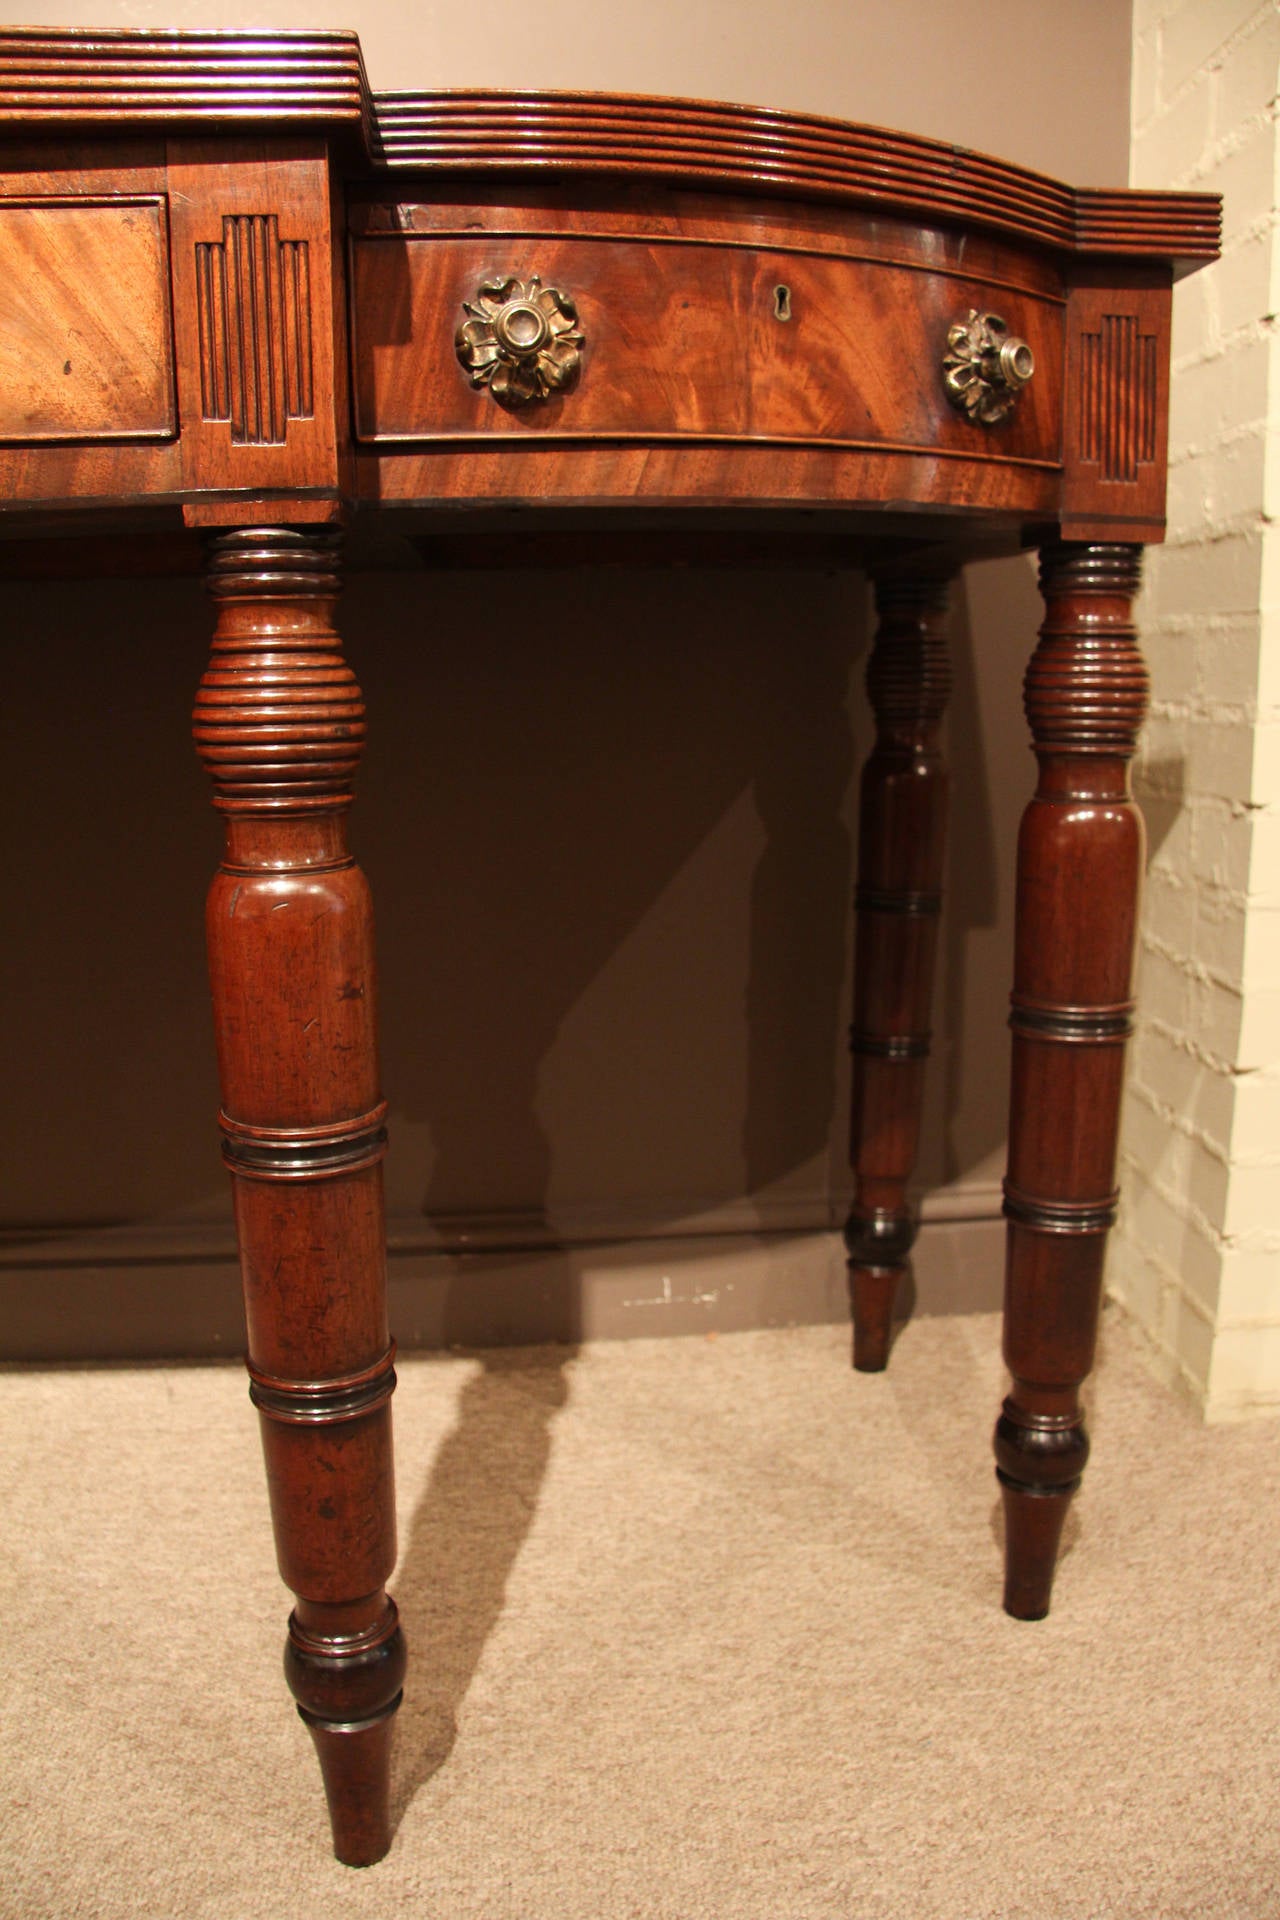 English Superb Regency Period Breakfast Serving Table or Sideboard, circa 1820